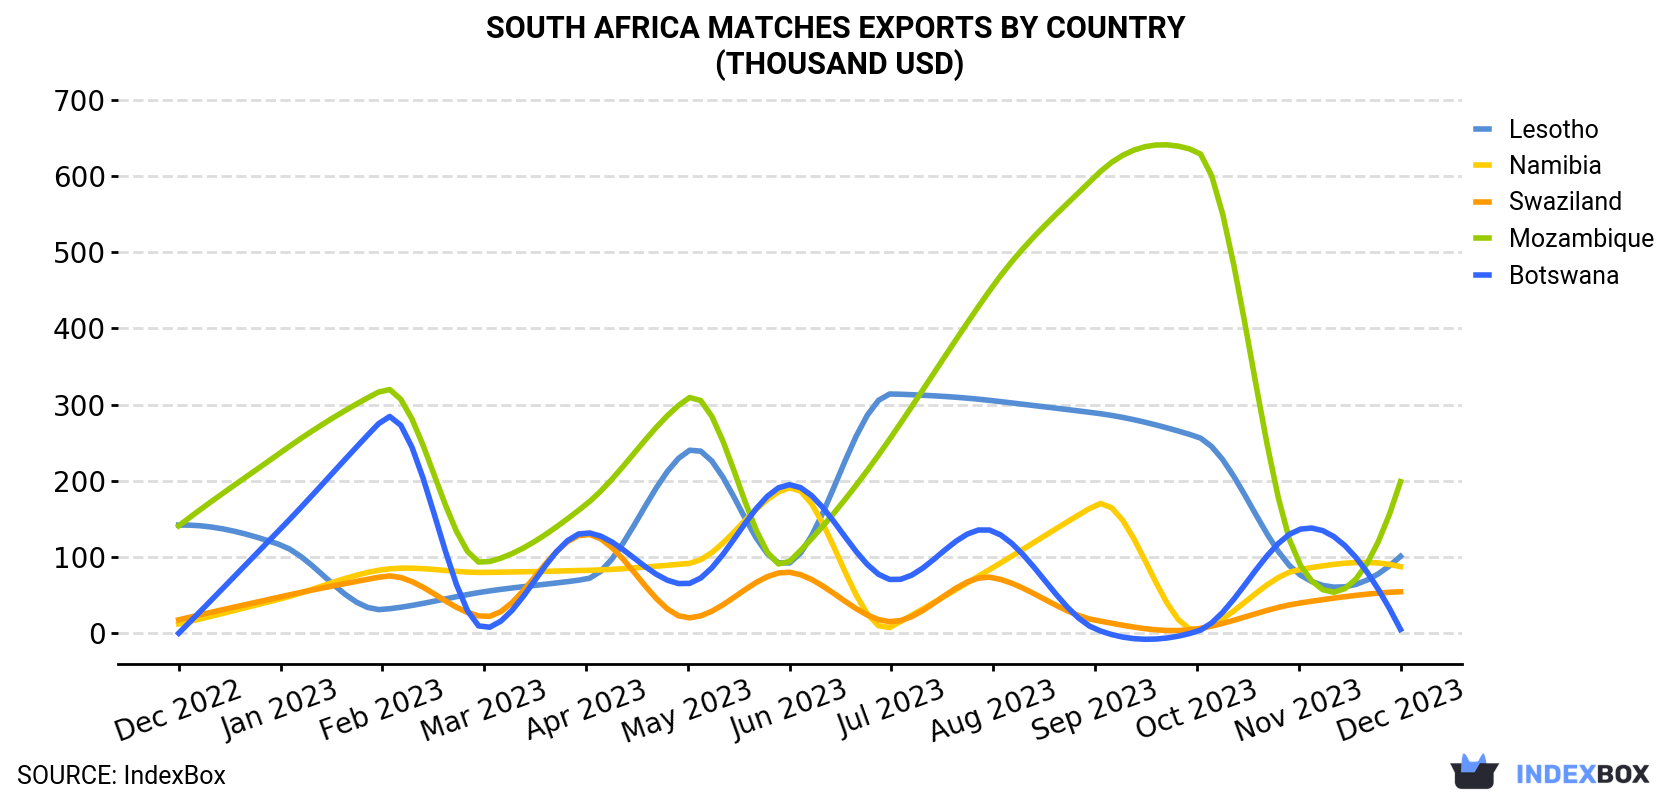 South Africa Matches Exports By Country (Thousand USD)